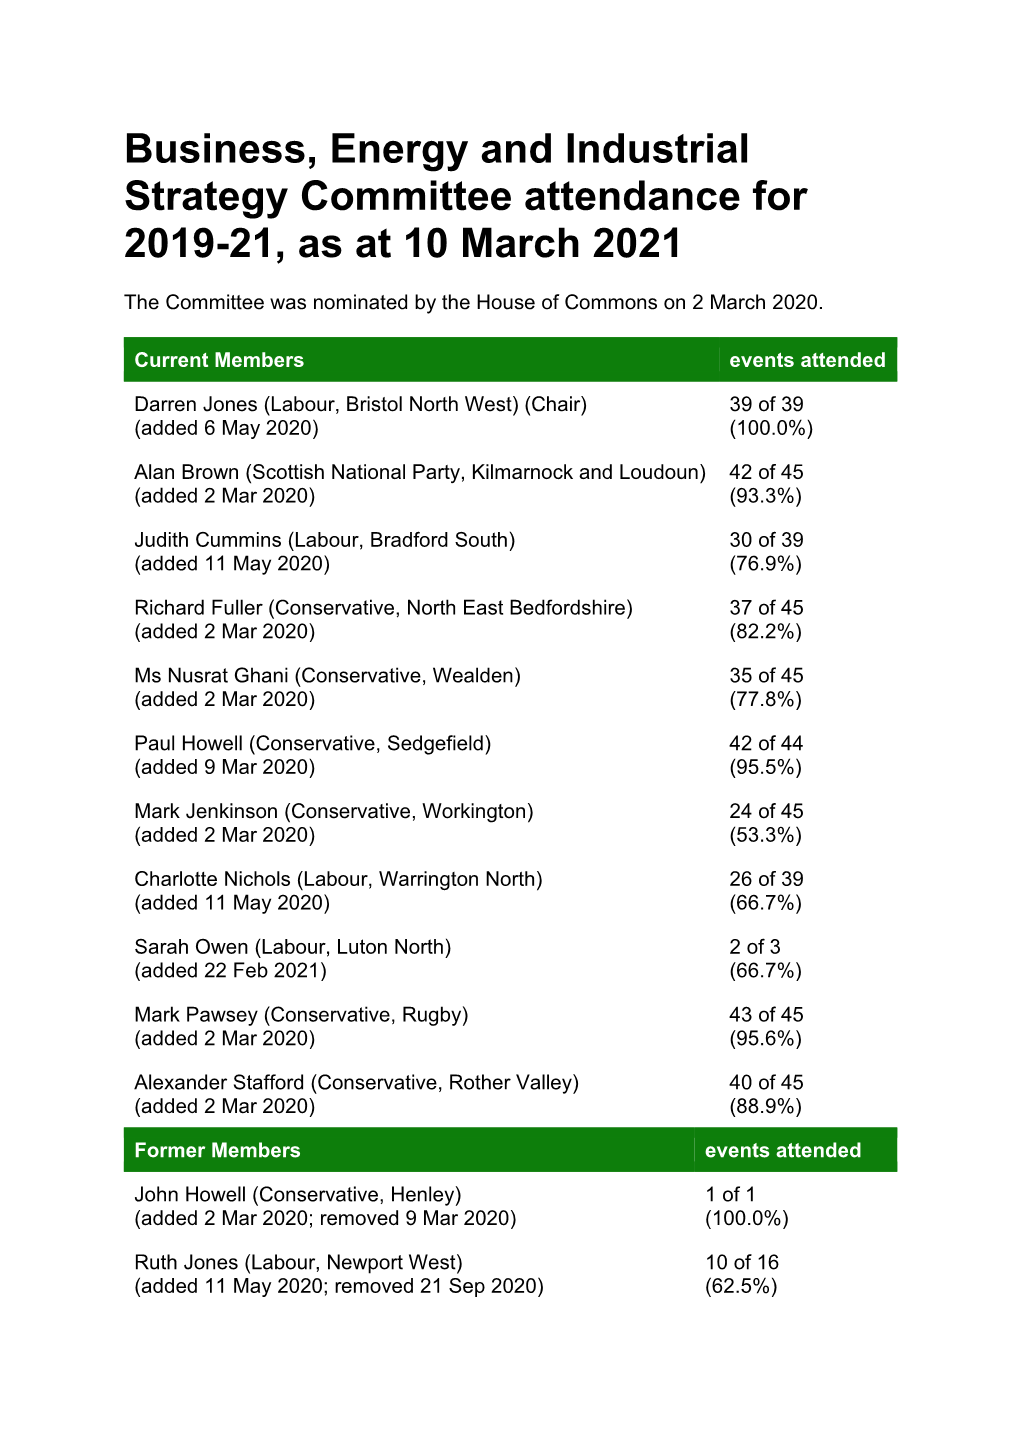 Business, Energy and Industrial Strategy Committee Attendance for 2019-21, As at 10 March 2021